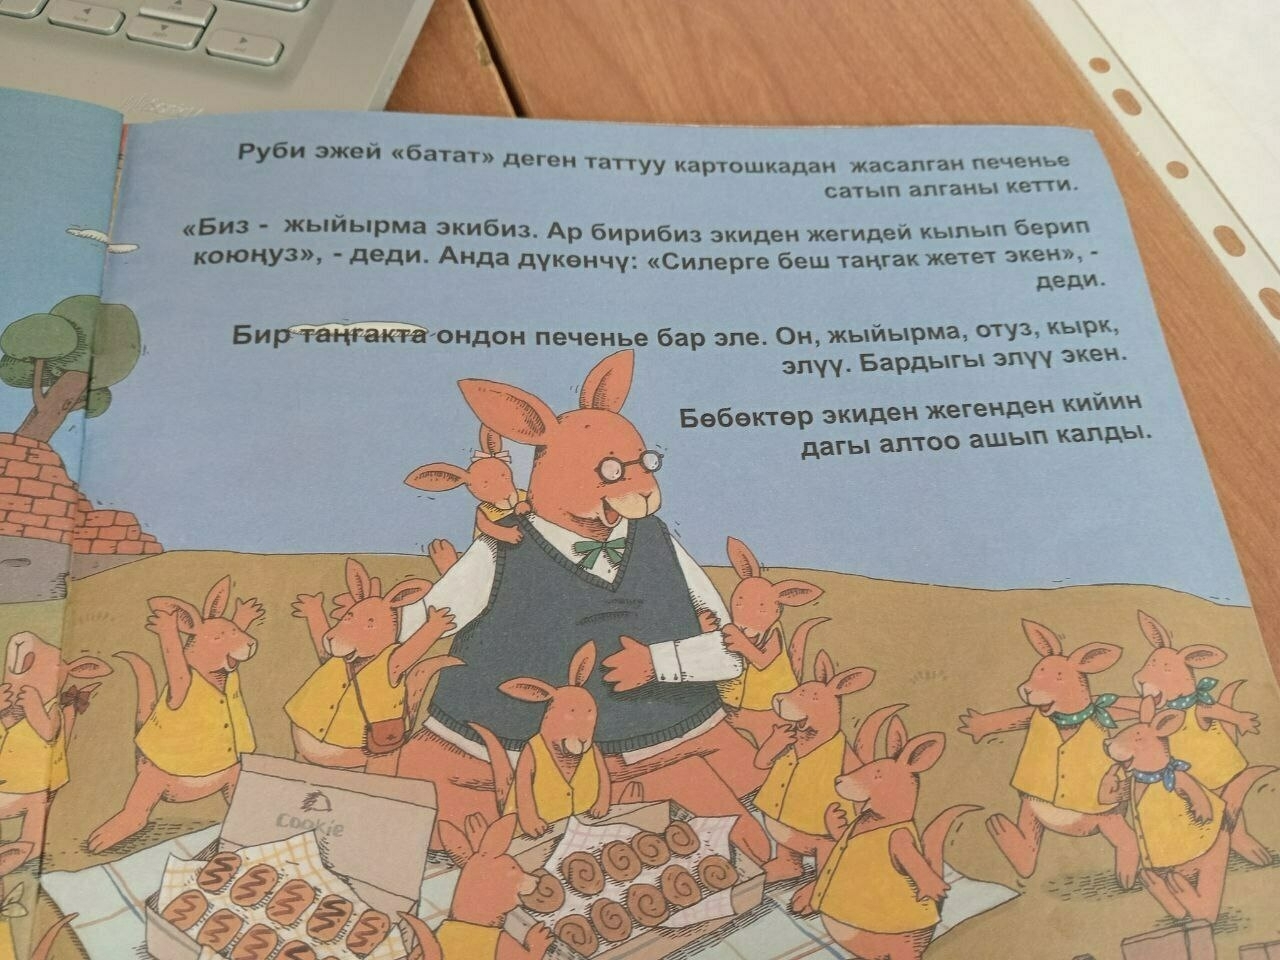 page in a picture book. one kangaroo teacher surrounded by many small kangaroo students. Kyrgyz text on upper right